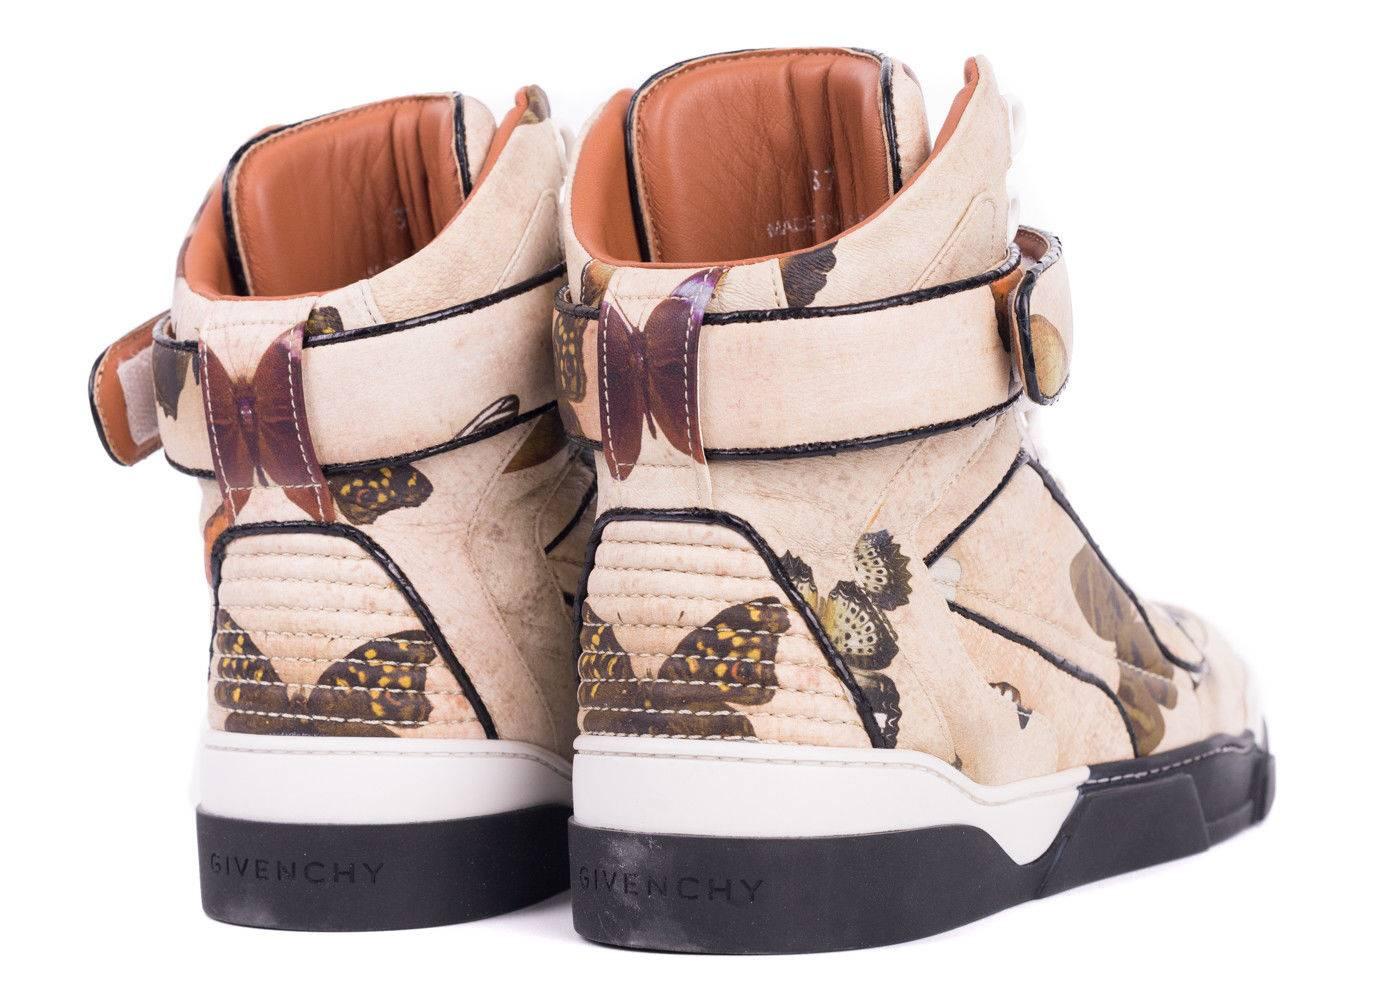 Givenchy Womens Tyson Butterfly Leather High Top Sneakers In New Condition For Sale In Brooklyn, NY